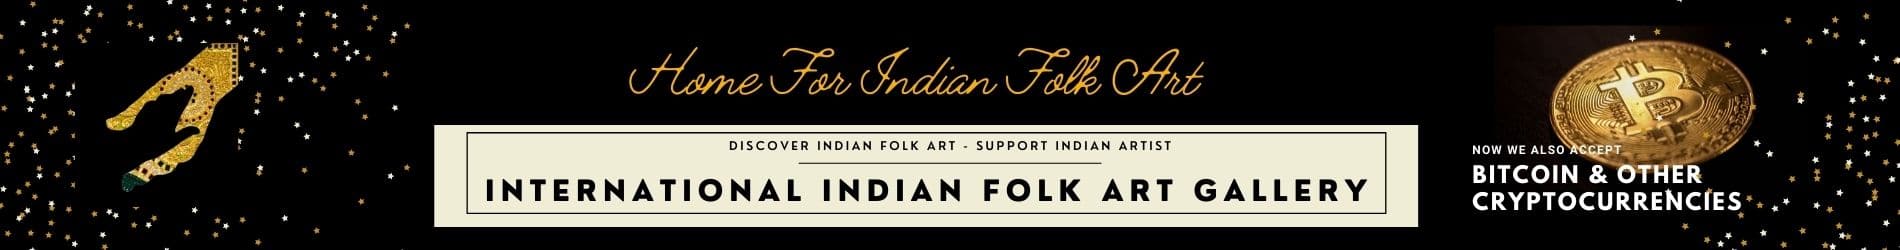 International Indian Folk Art Gallery, Home for Indian Folk Art. Discover Indian Folk Art, Support Indian Artists. We now also accept Bitcoin and other cryptocurrencies